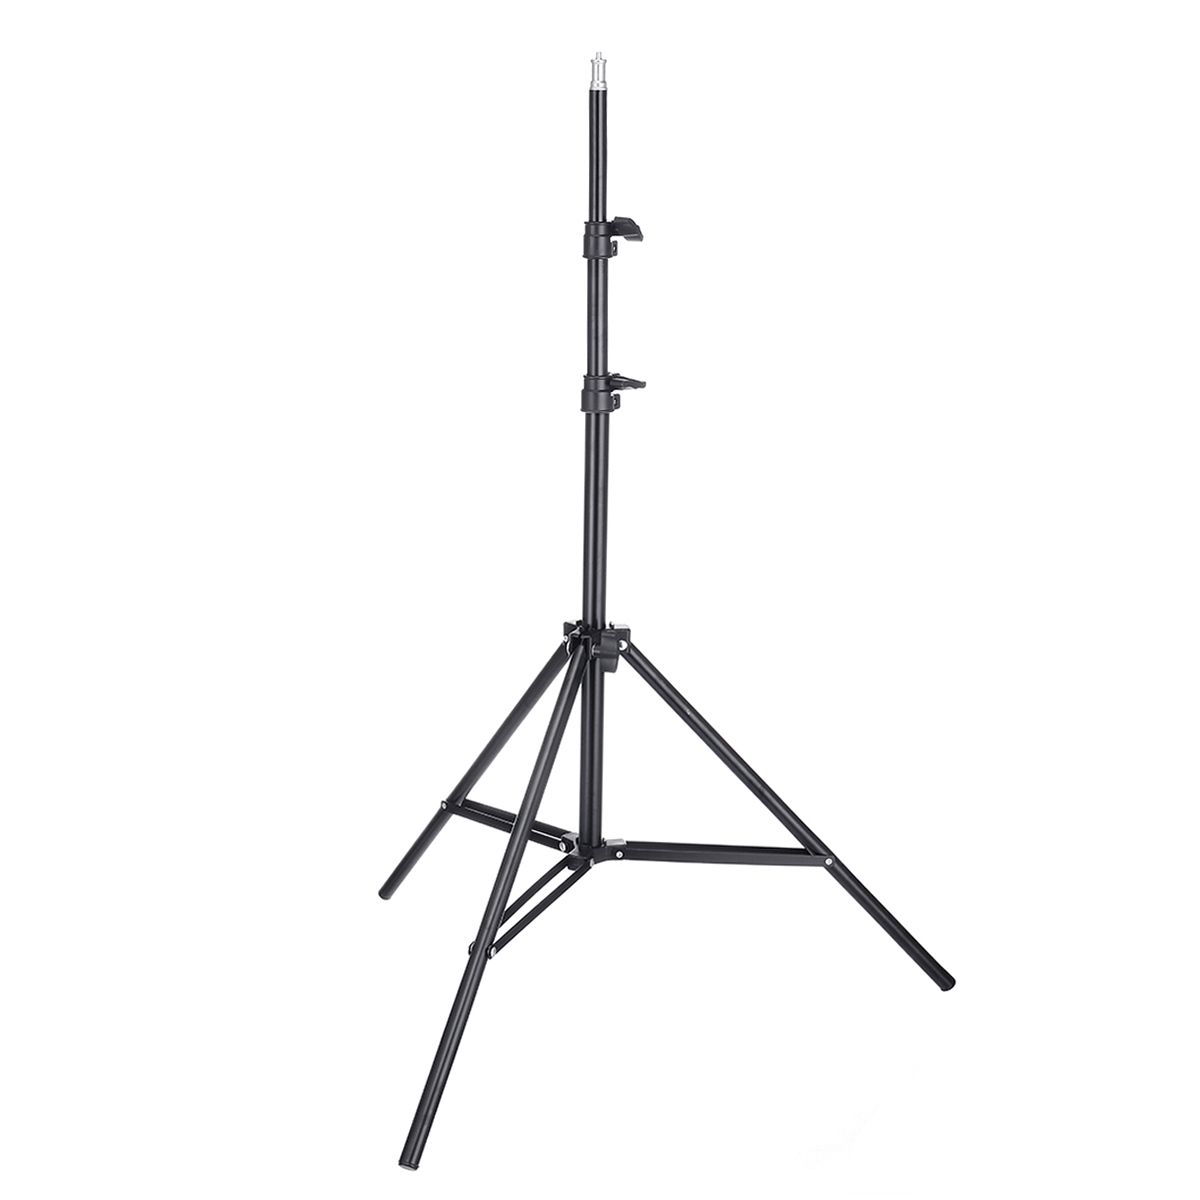 12-Inch-Dimmable-LED-Video-Ring-Light-with-Diffuser-Tripod-Stand-Holder-for-Youtube-Tik-Tok-Live-Str-1639911